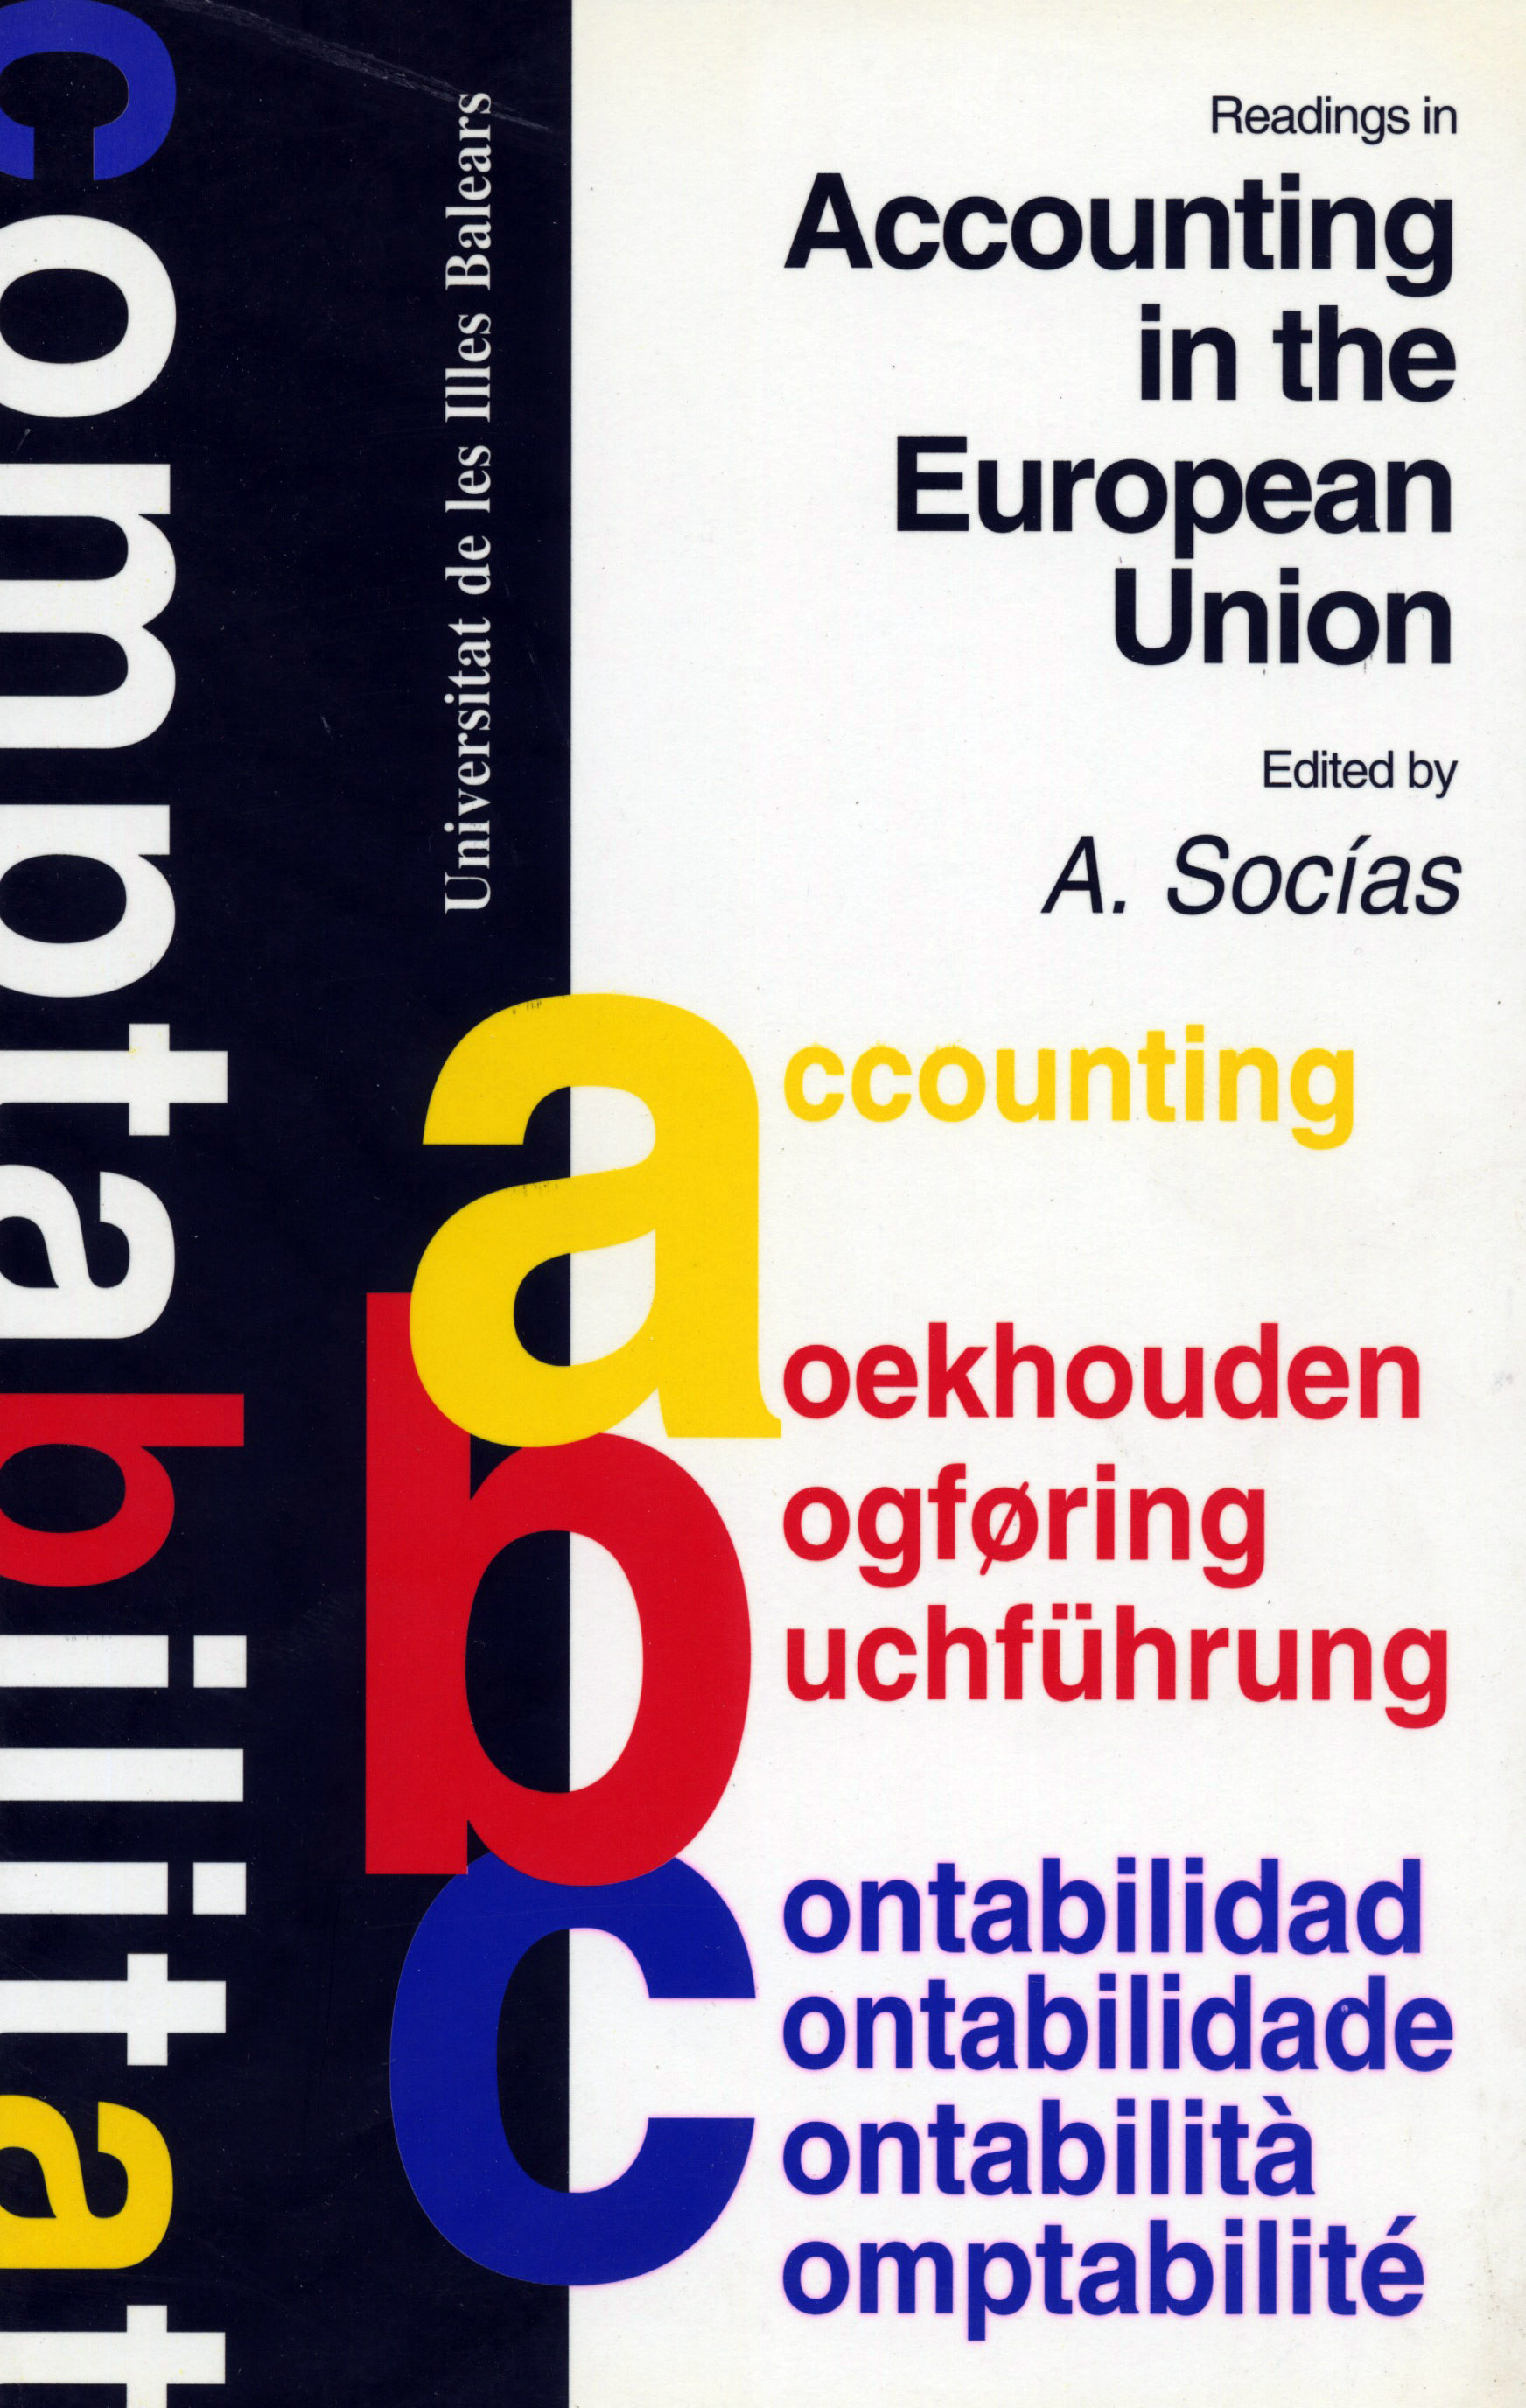 Readings accounting the european union